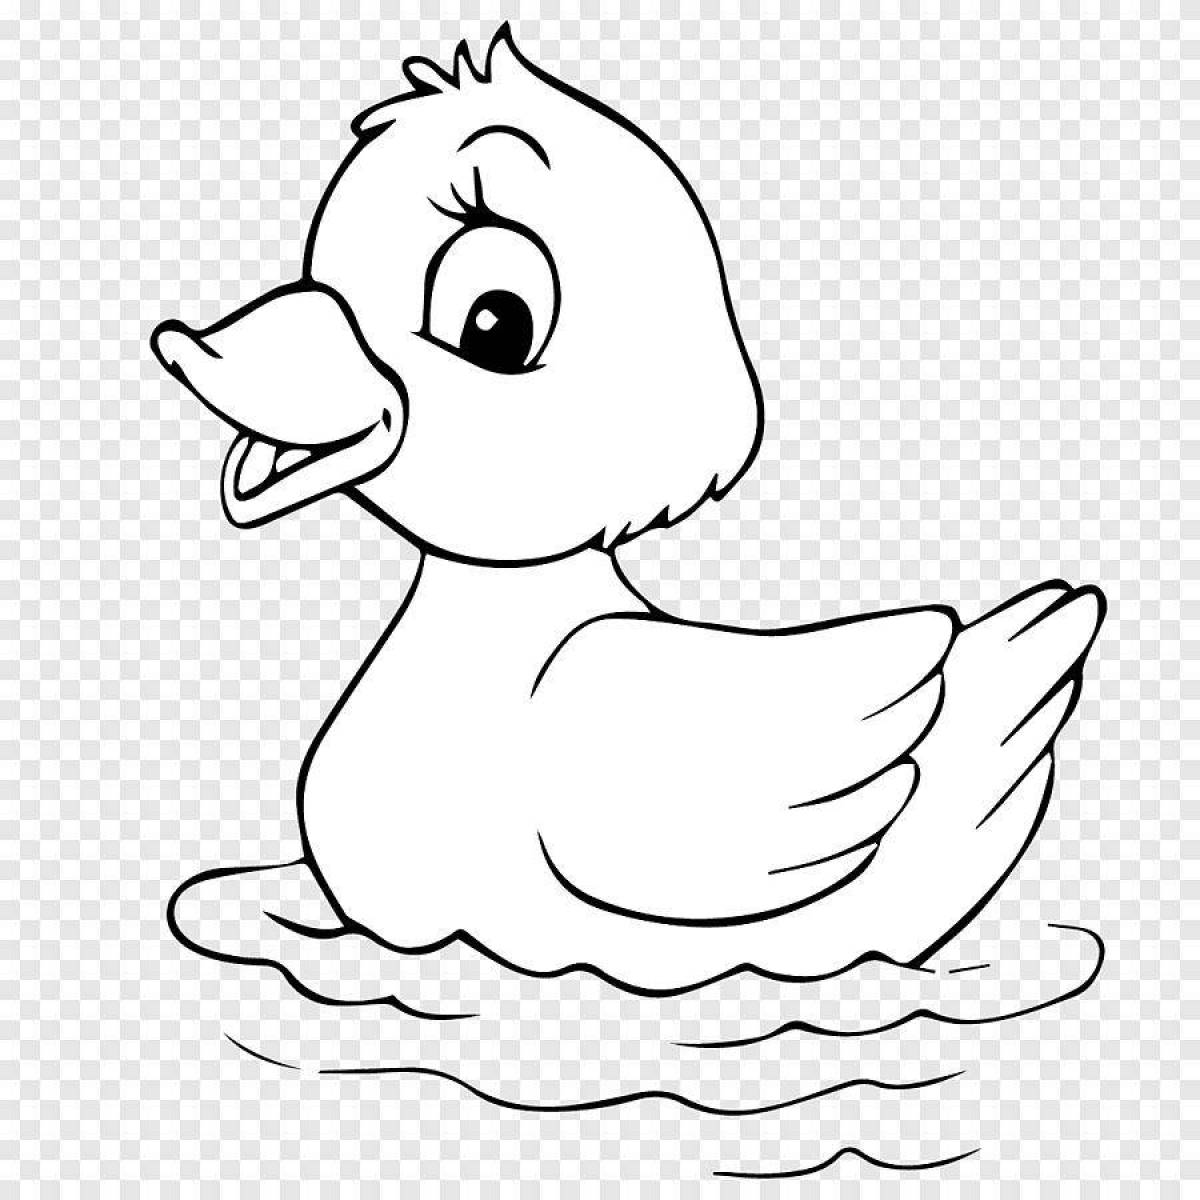 Coloring big duck in clothes